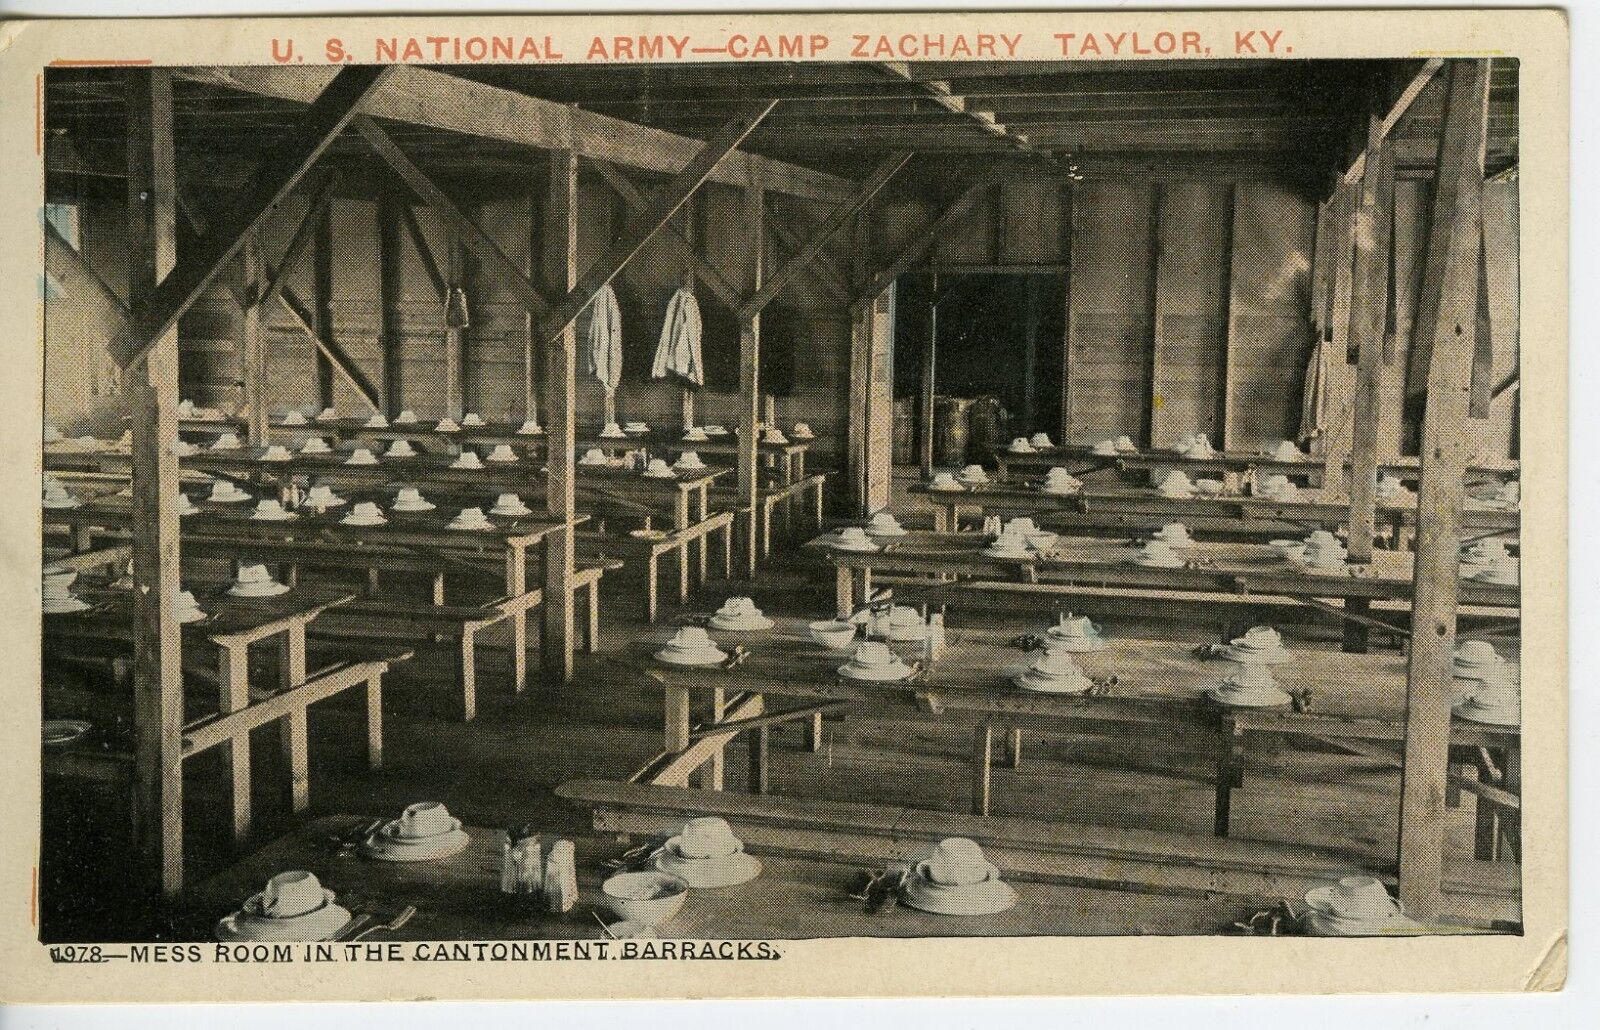 WWI U.S. National Army  Camp Zachary Taylor Mess Room 1917  Ex. Cond.